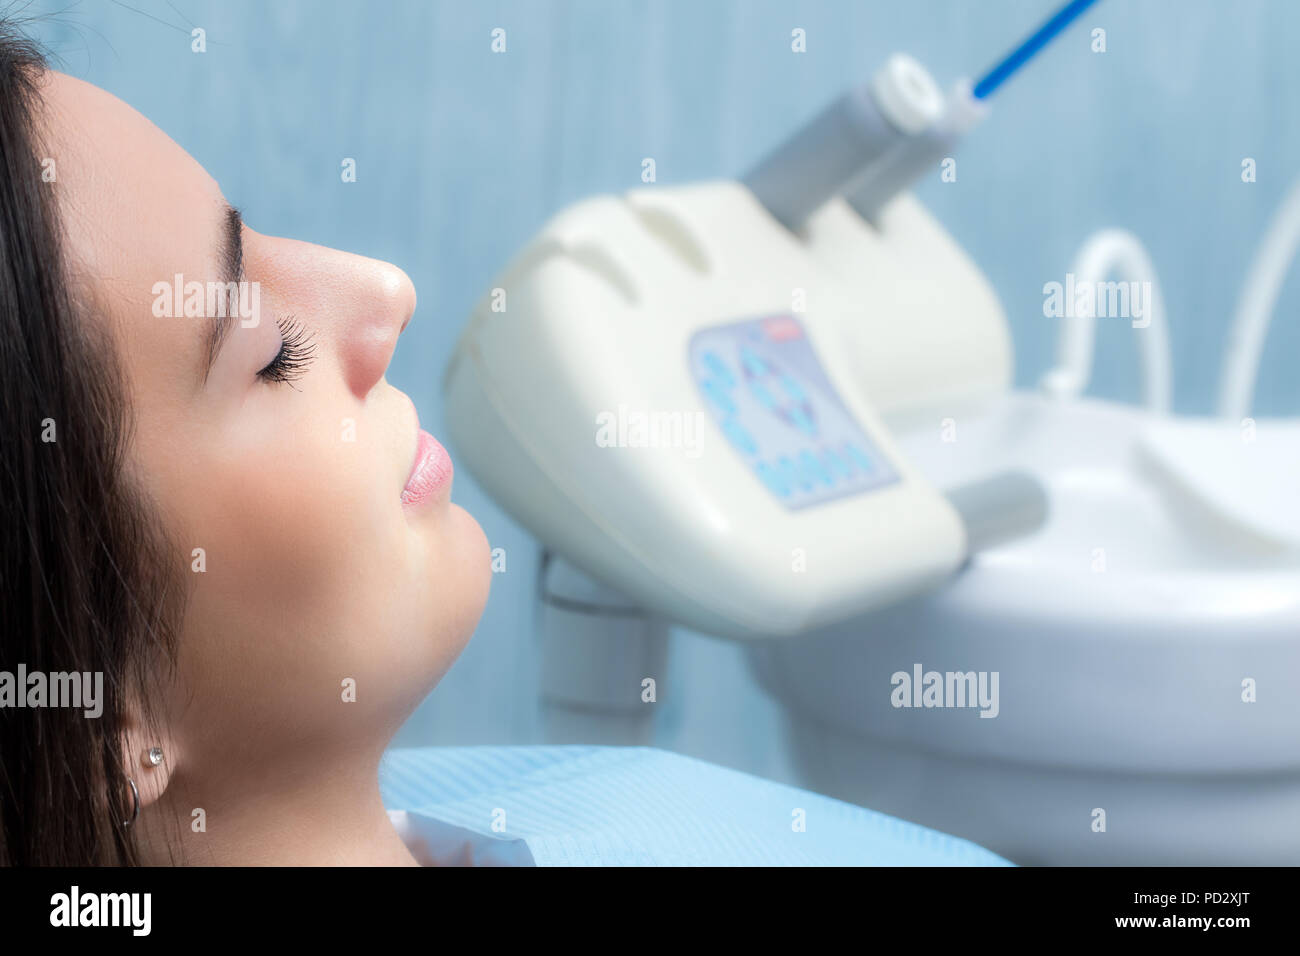 Close up side view portrait of young woman at dental check up.Girl laying with eyes closed with equipment in background. Stock Photo